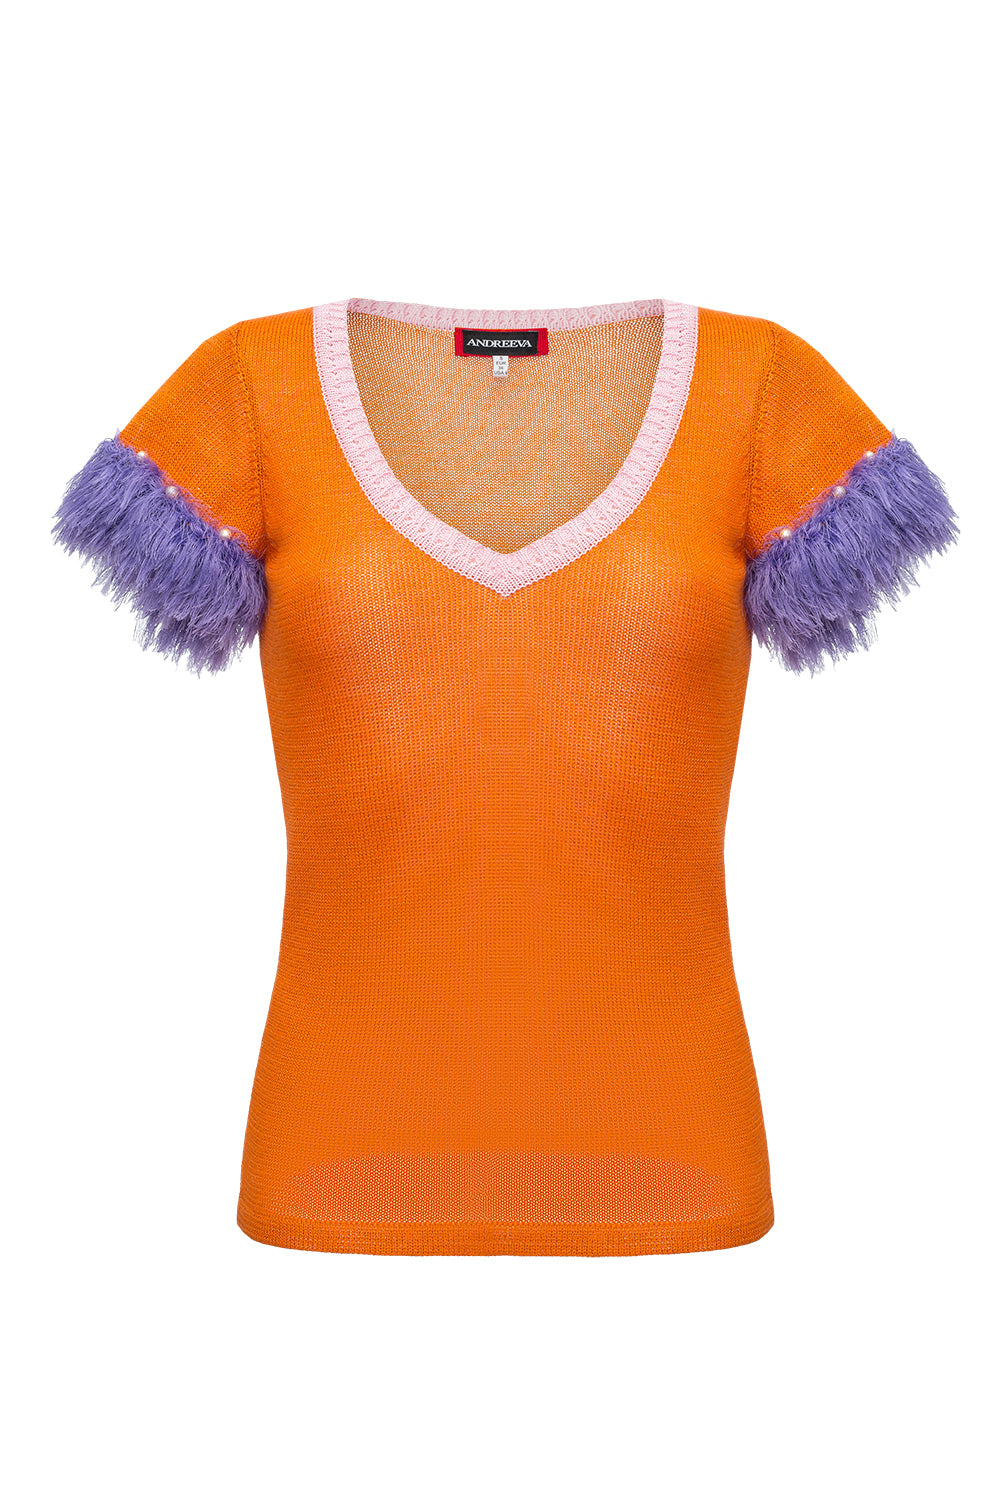 Women’s Yellow / Orange Golden Poppy Knit Top With Handmade Knit Details Small Andreeva